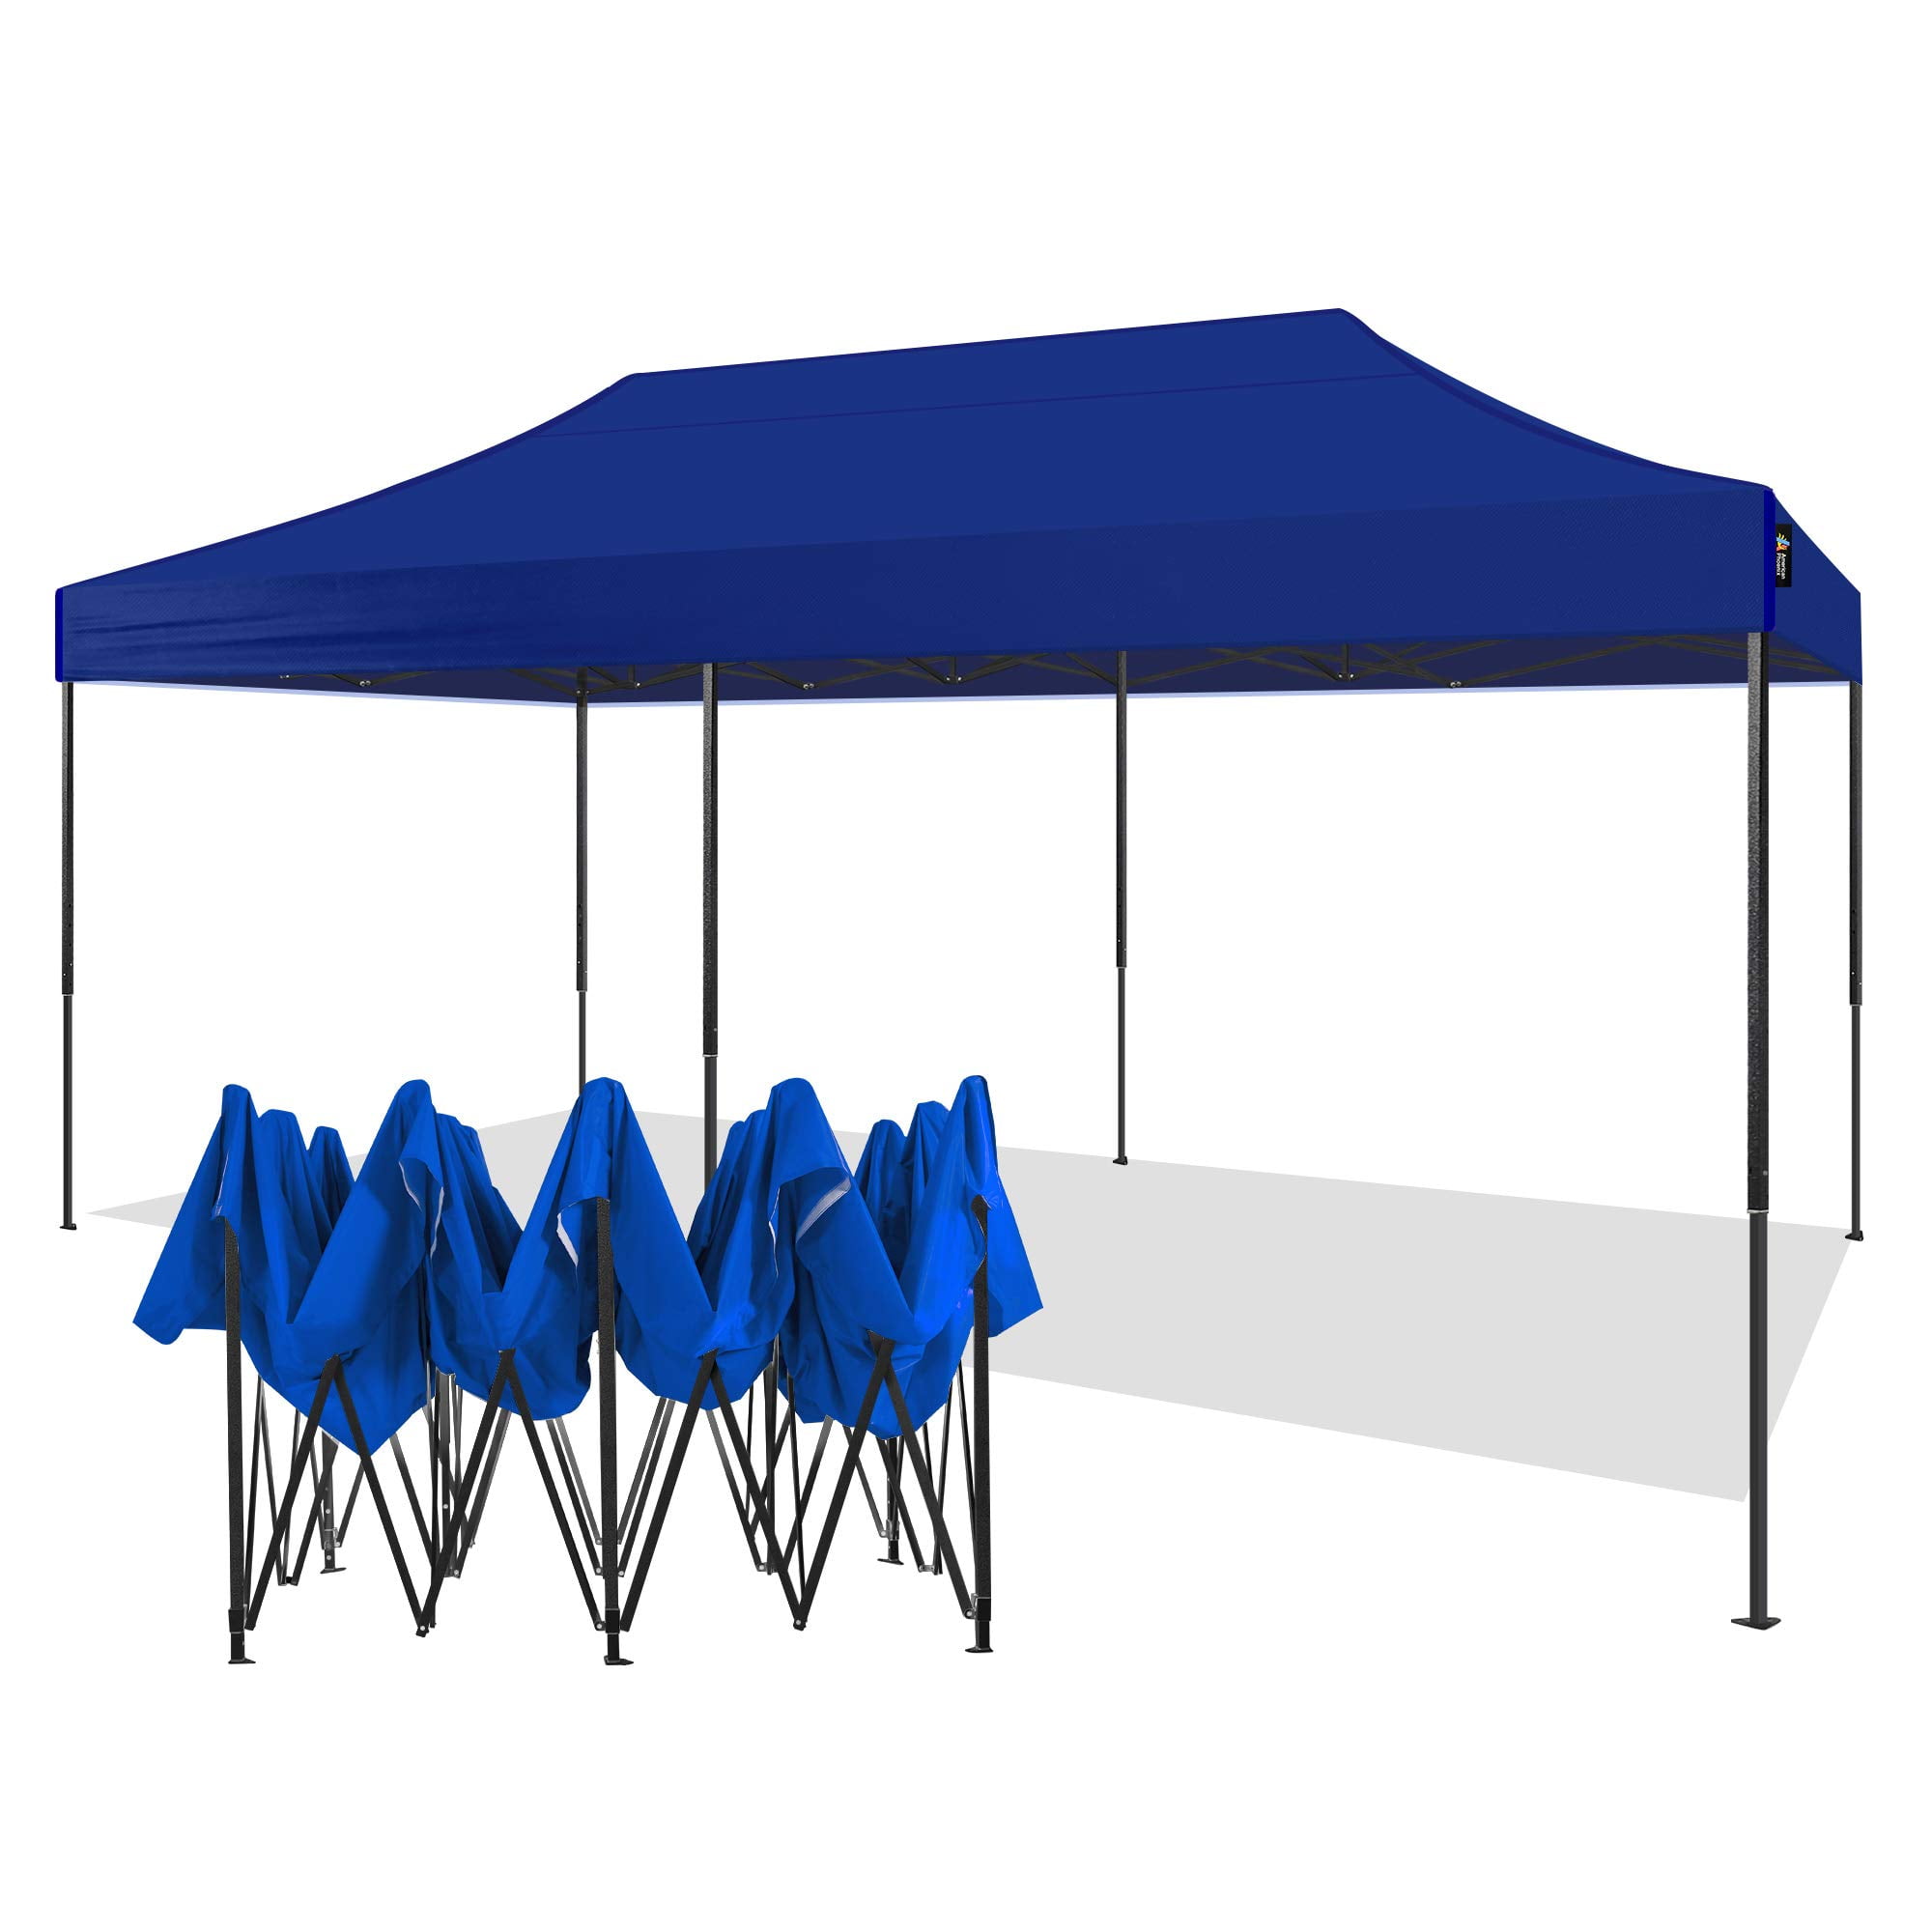 Details about     10x20 Ft Outdoor Patio Pop up Canopy Party Wedding Gazebo Tent 